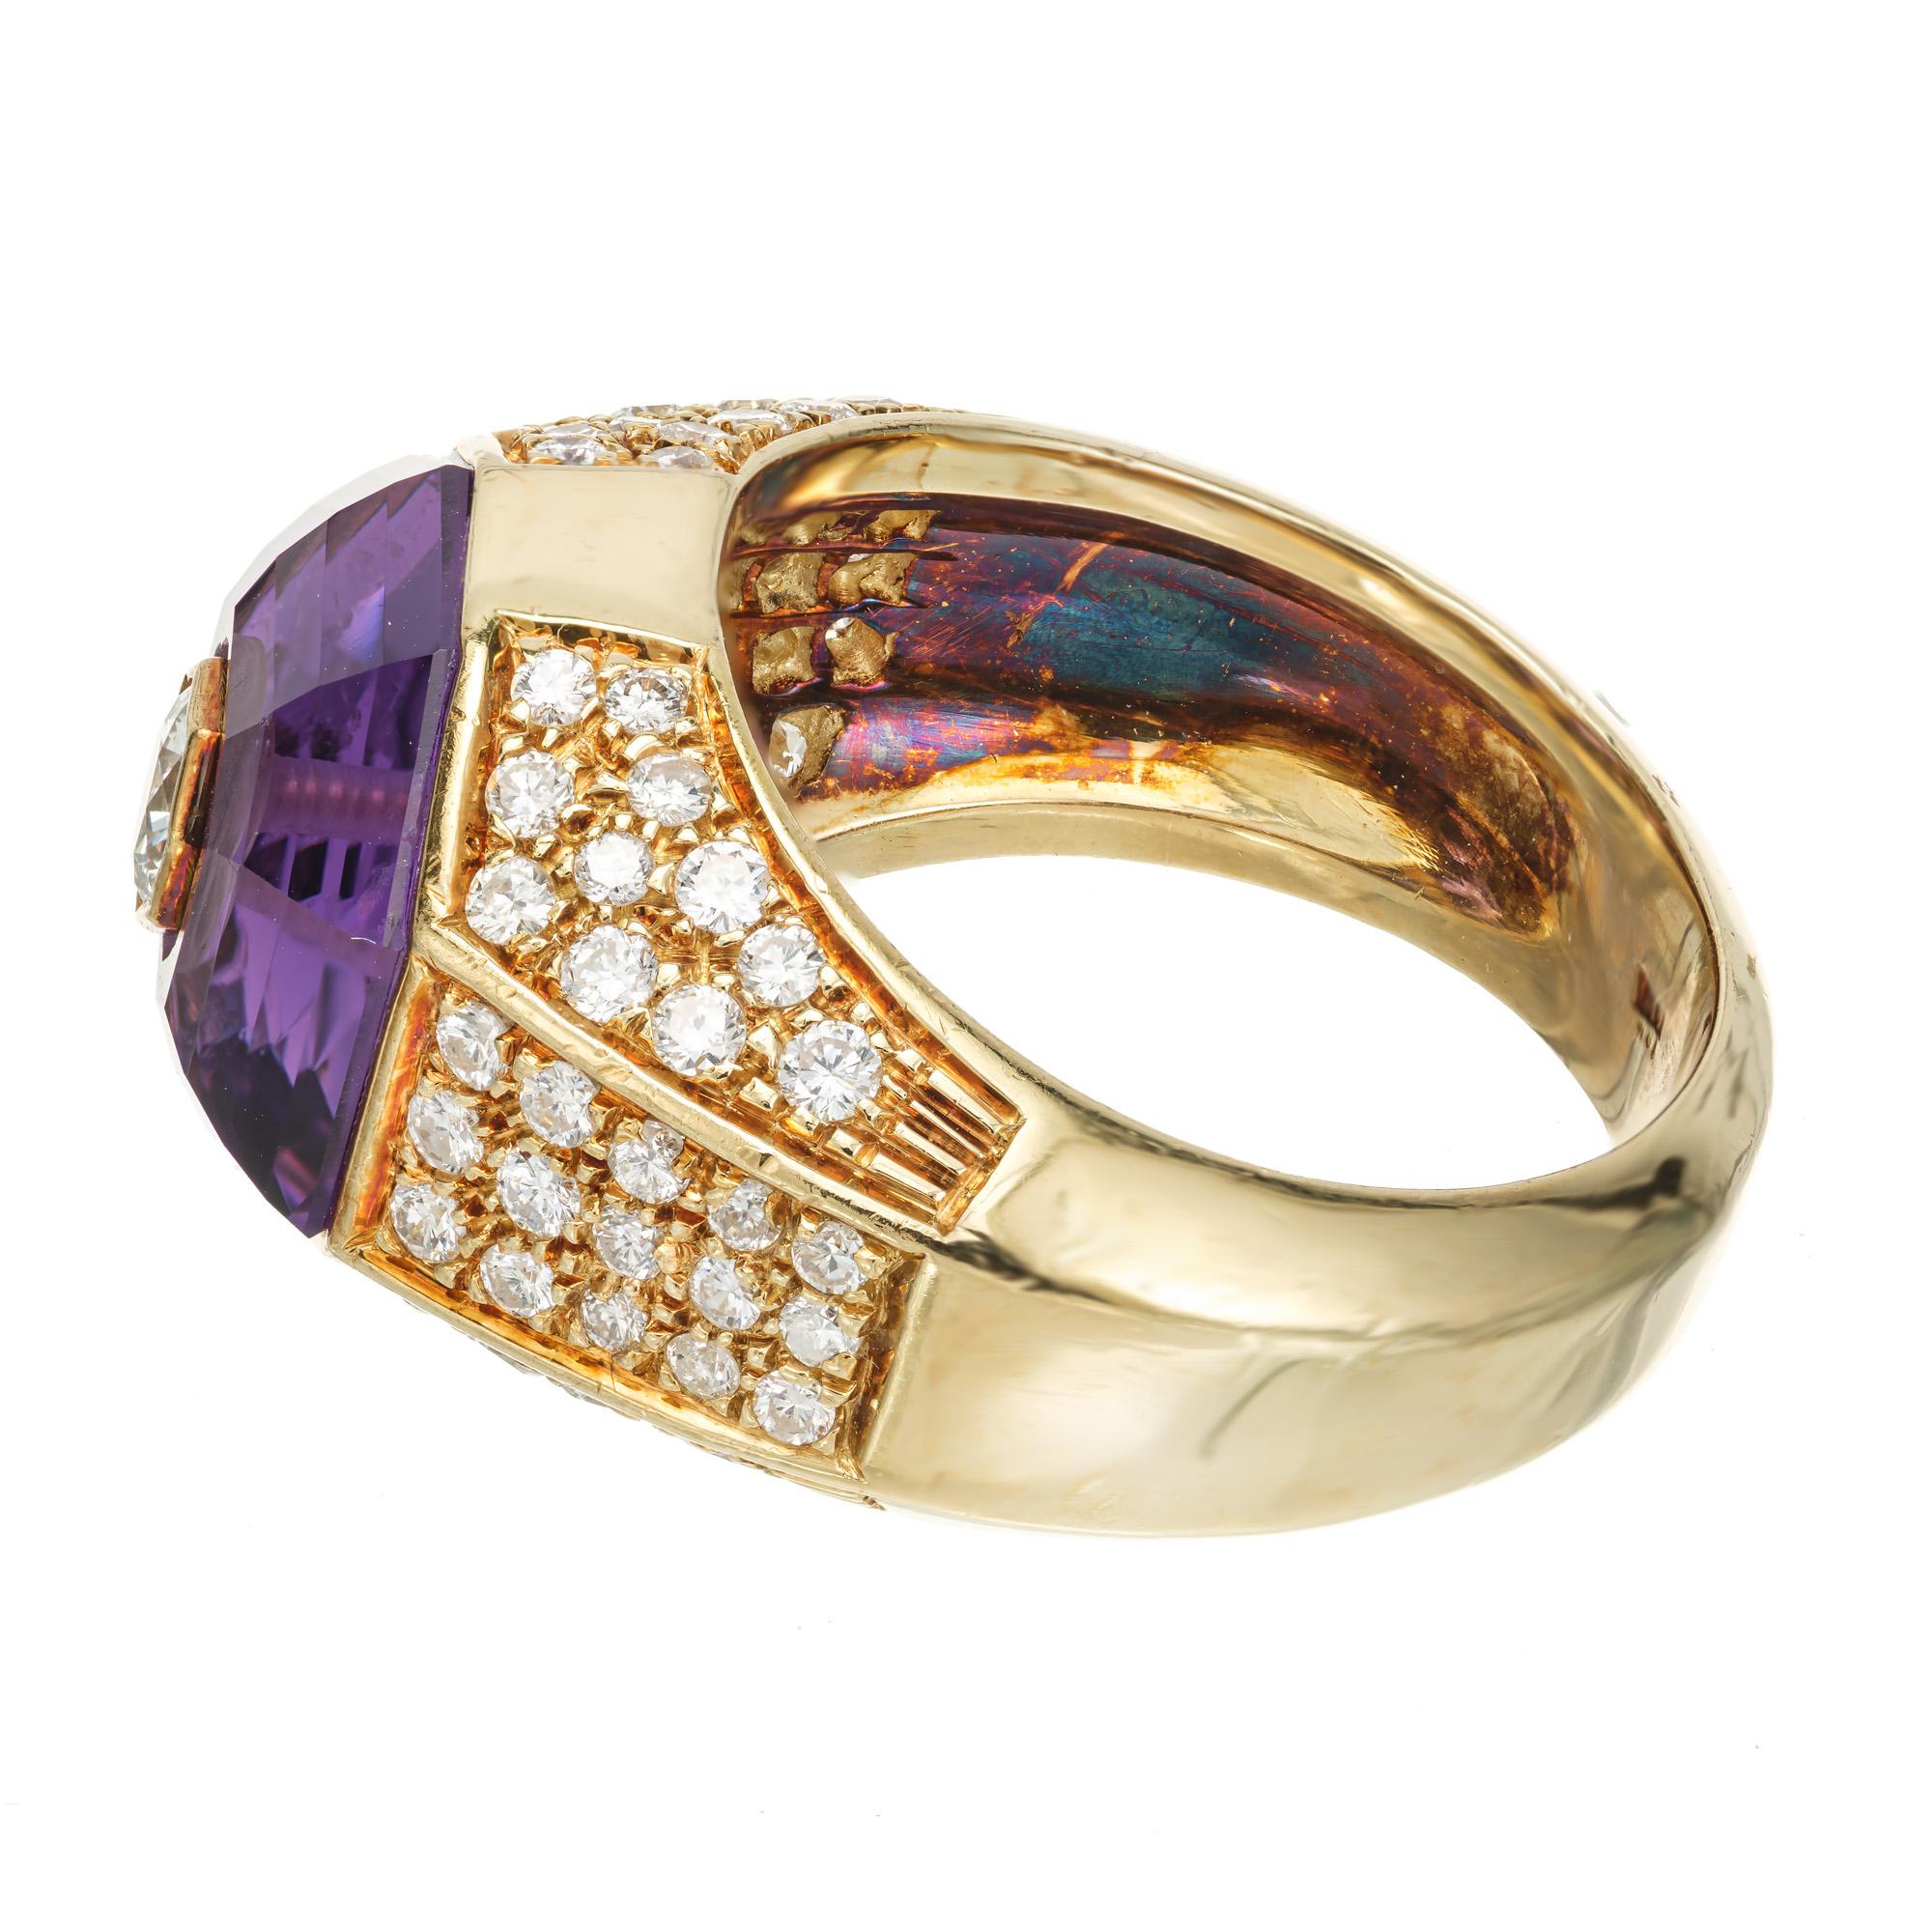 3.50 Carat Octagonal Amethyst Halo Diamond Gold Ring In Good Condition For Sale In Stamford, CT